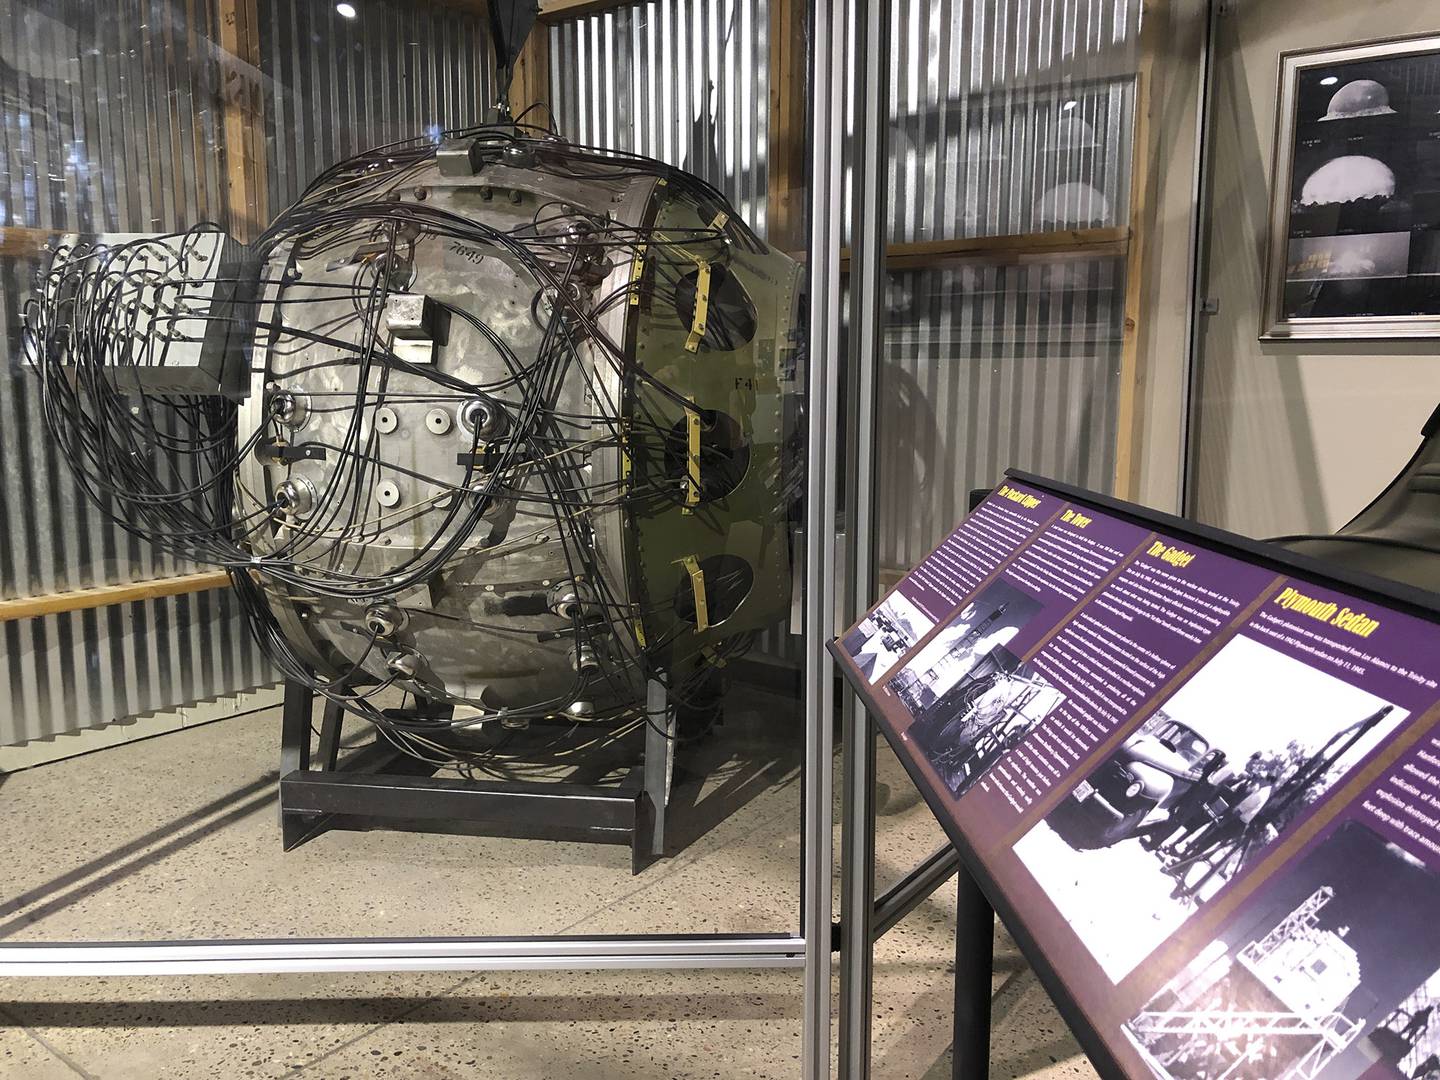 A mockup of the "Gadget" that was detonated during the Trinity Test in 1945, marking the world's first atomic explosion, is on display Wednesday, July 15, 2020, at the National Museum of Nuclear Science and History in Albuquerque, N.M.